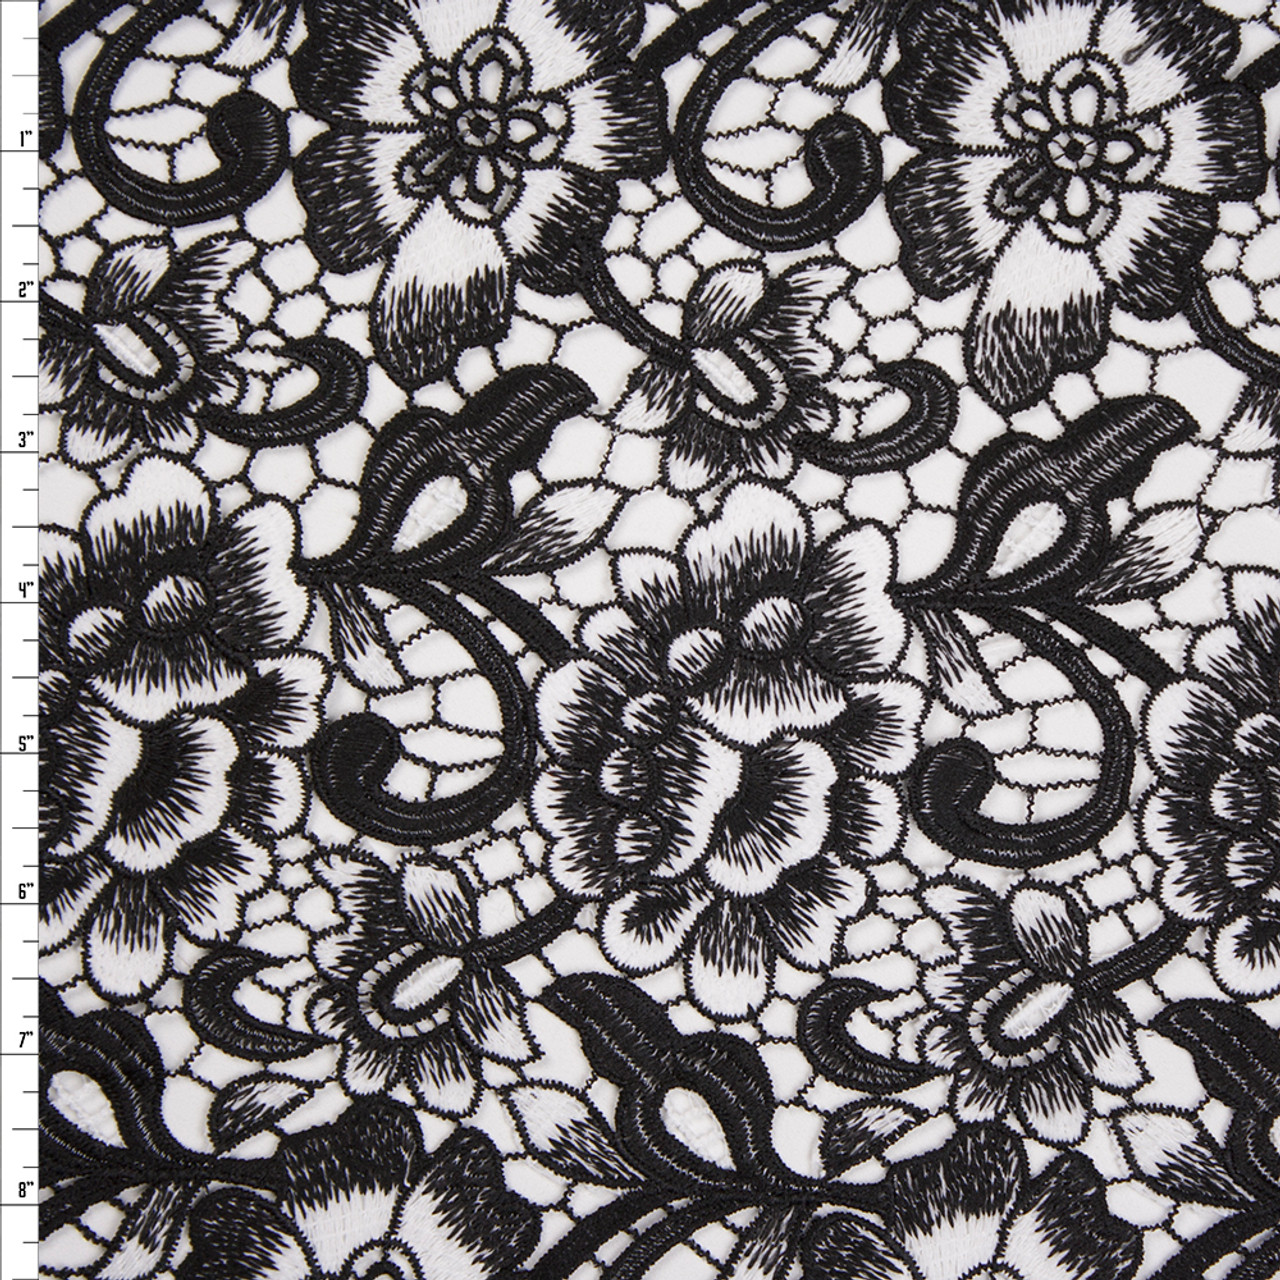 Lace Black Floral Paisley Design 60 Wide Polyester/Blend Dutch Lace Fabric  by the Yard (7334T-7C)